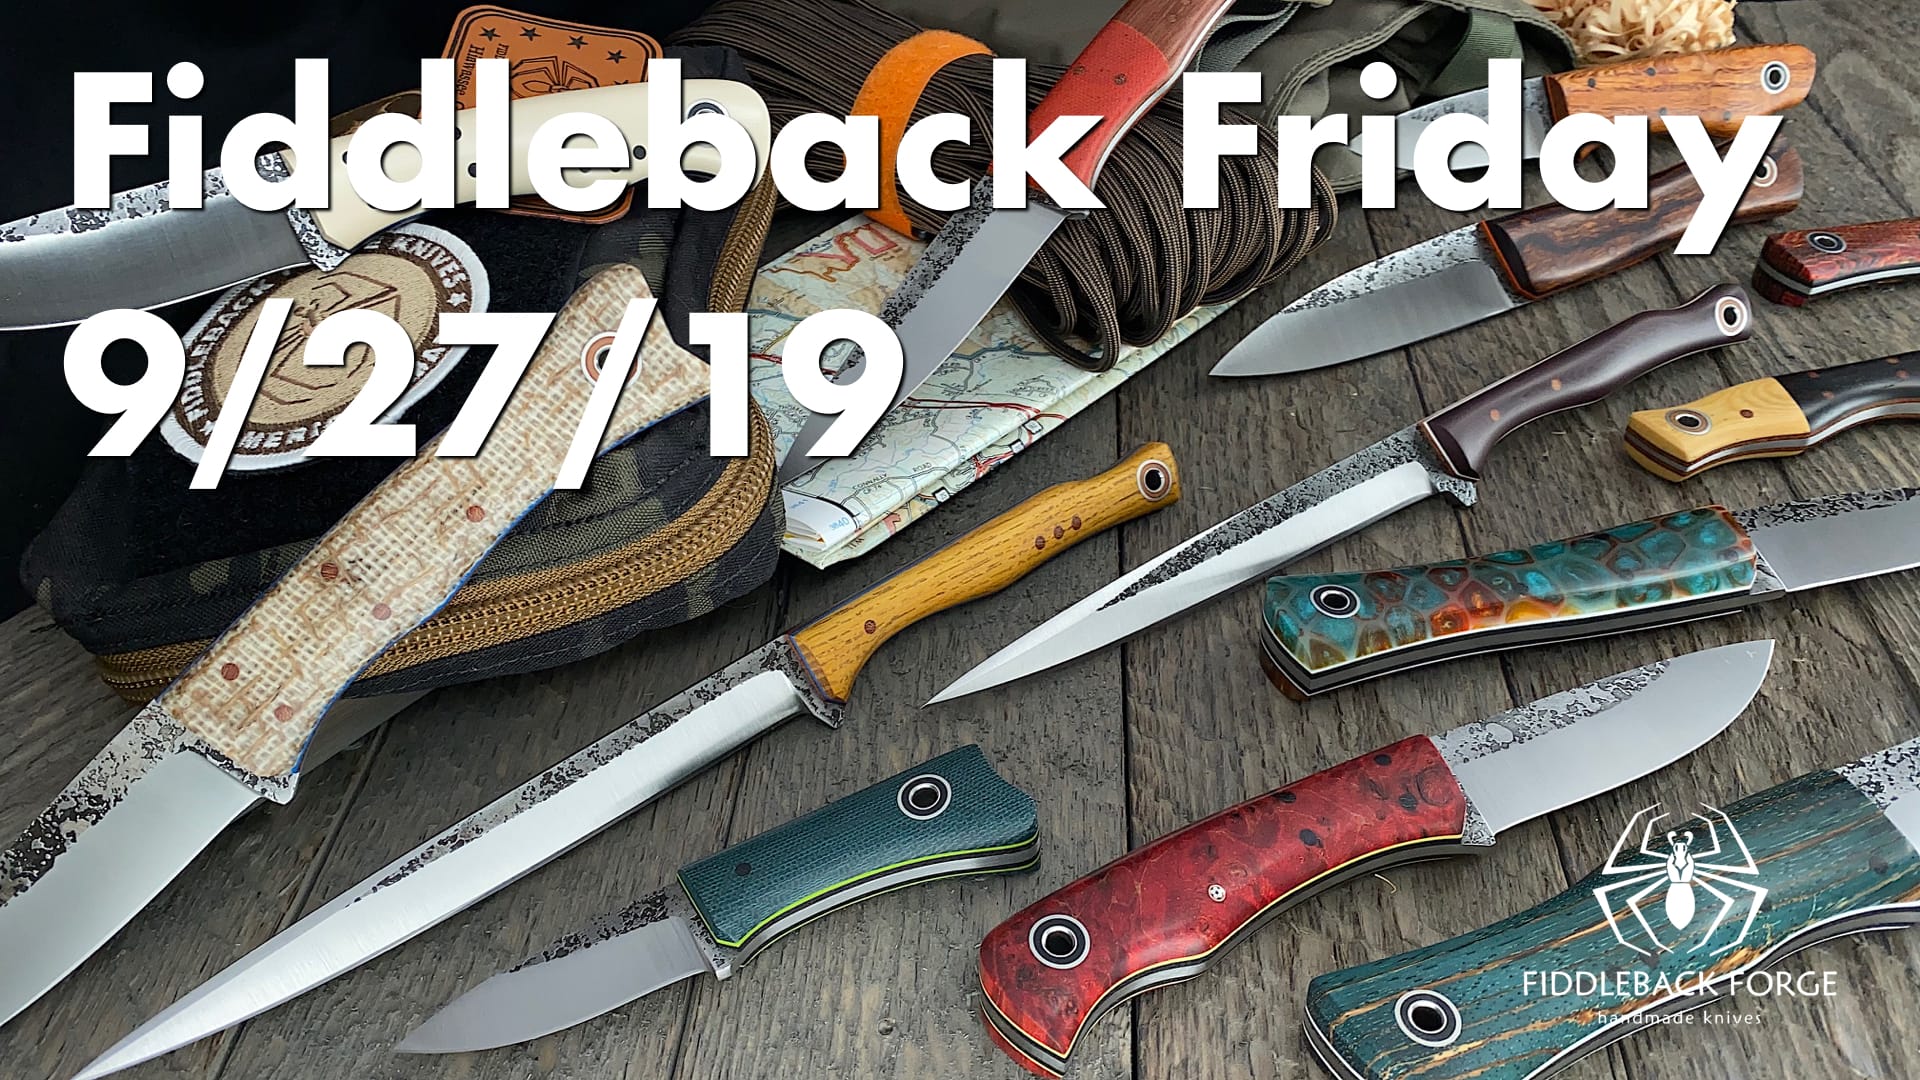 Fiddleback Friday 9/27/19 - Video Preview